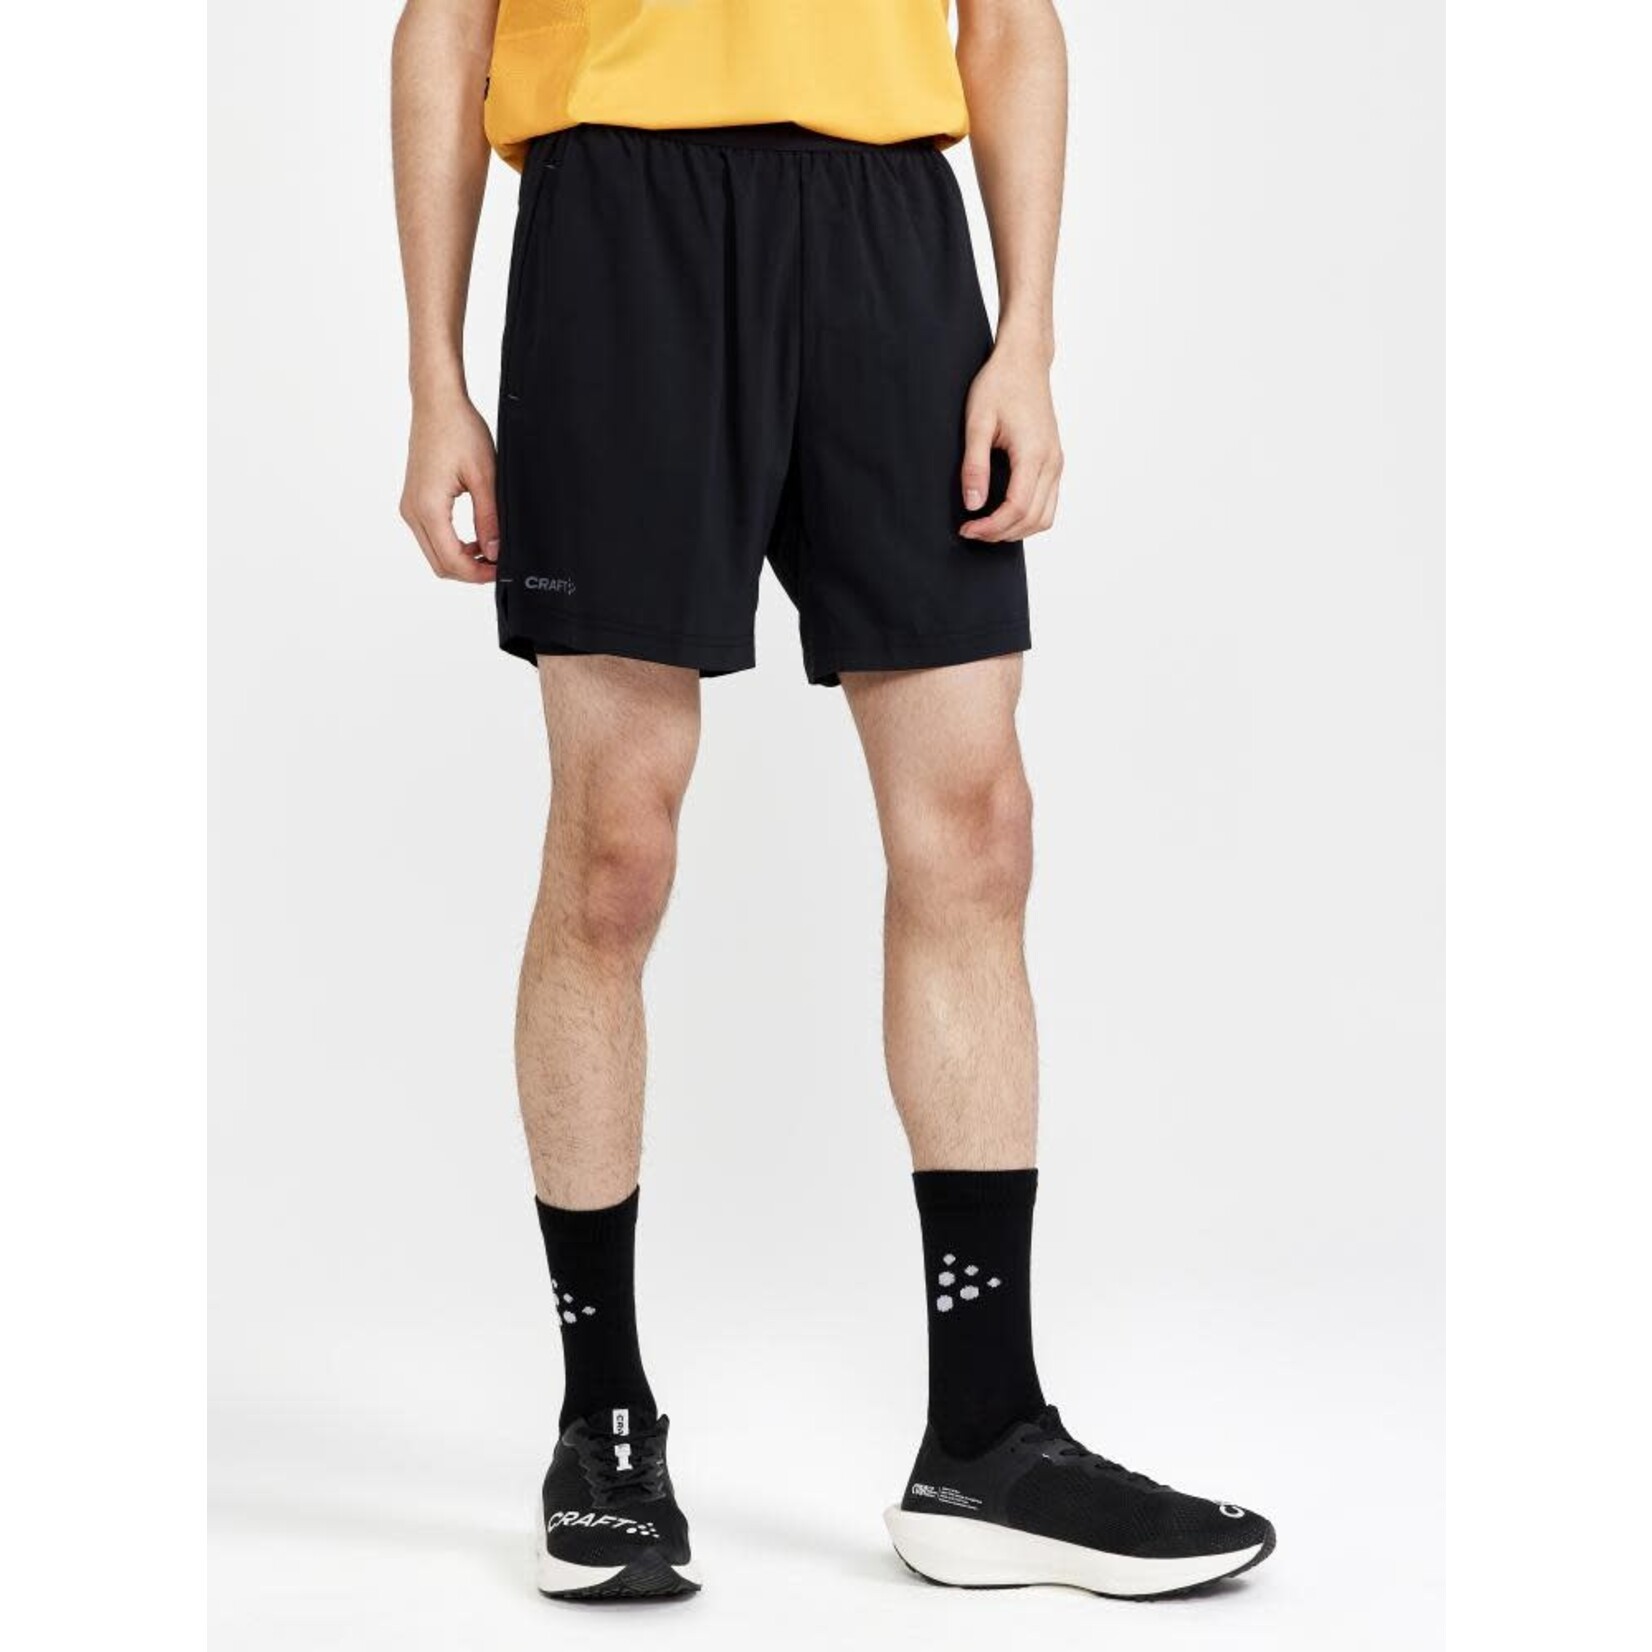 Craft Adv Essence Perforated 2-in-1 Stretch Shorts M (homme)